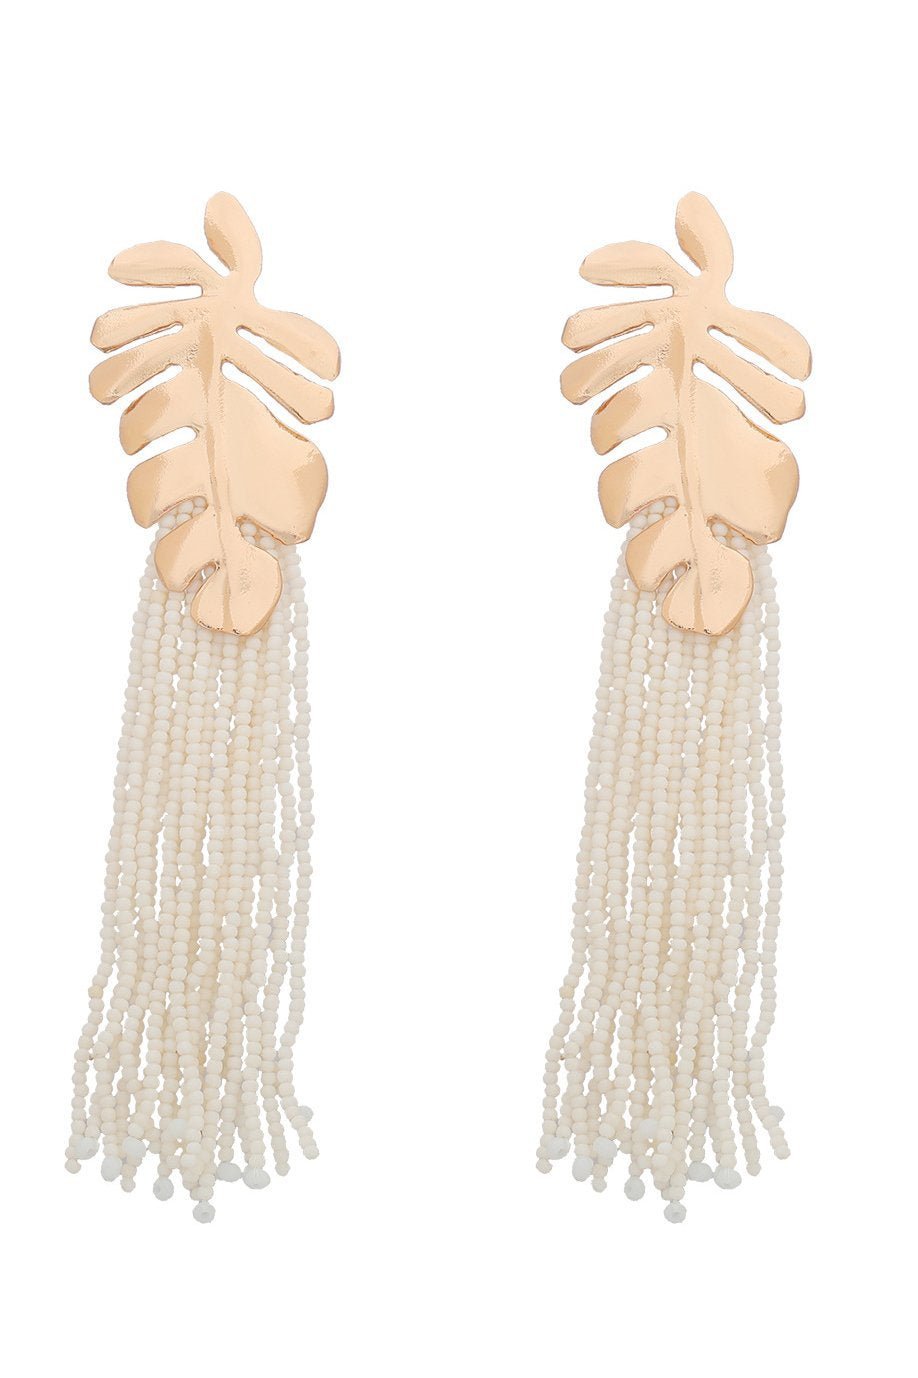 accessories-Palm Frond Beads Tassel Earring-SA00602262315-White - Sunfere